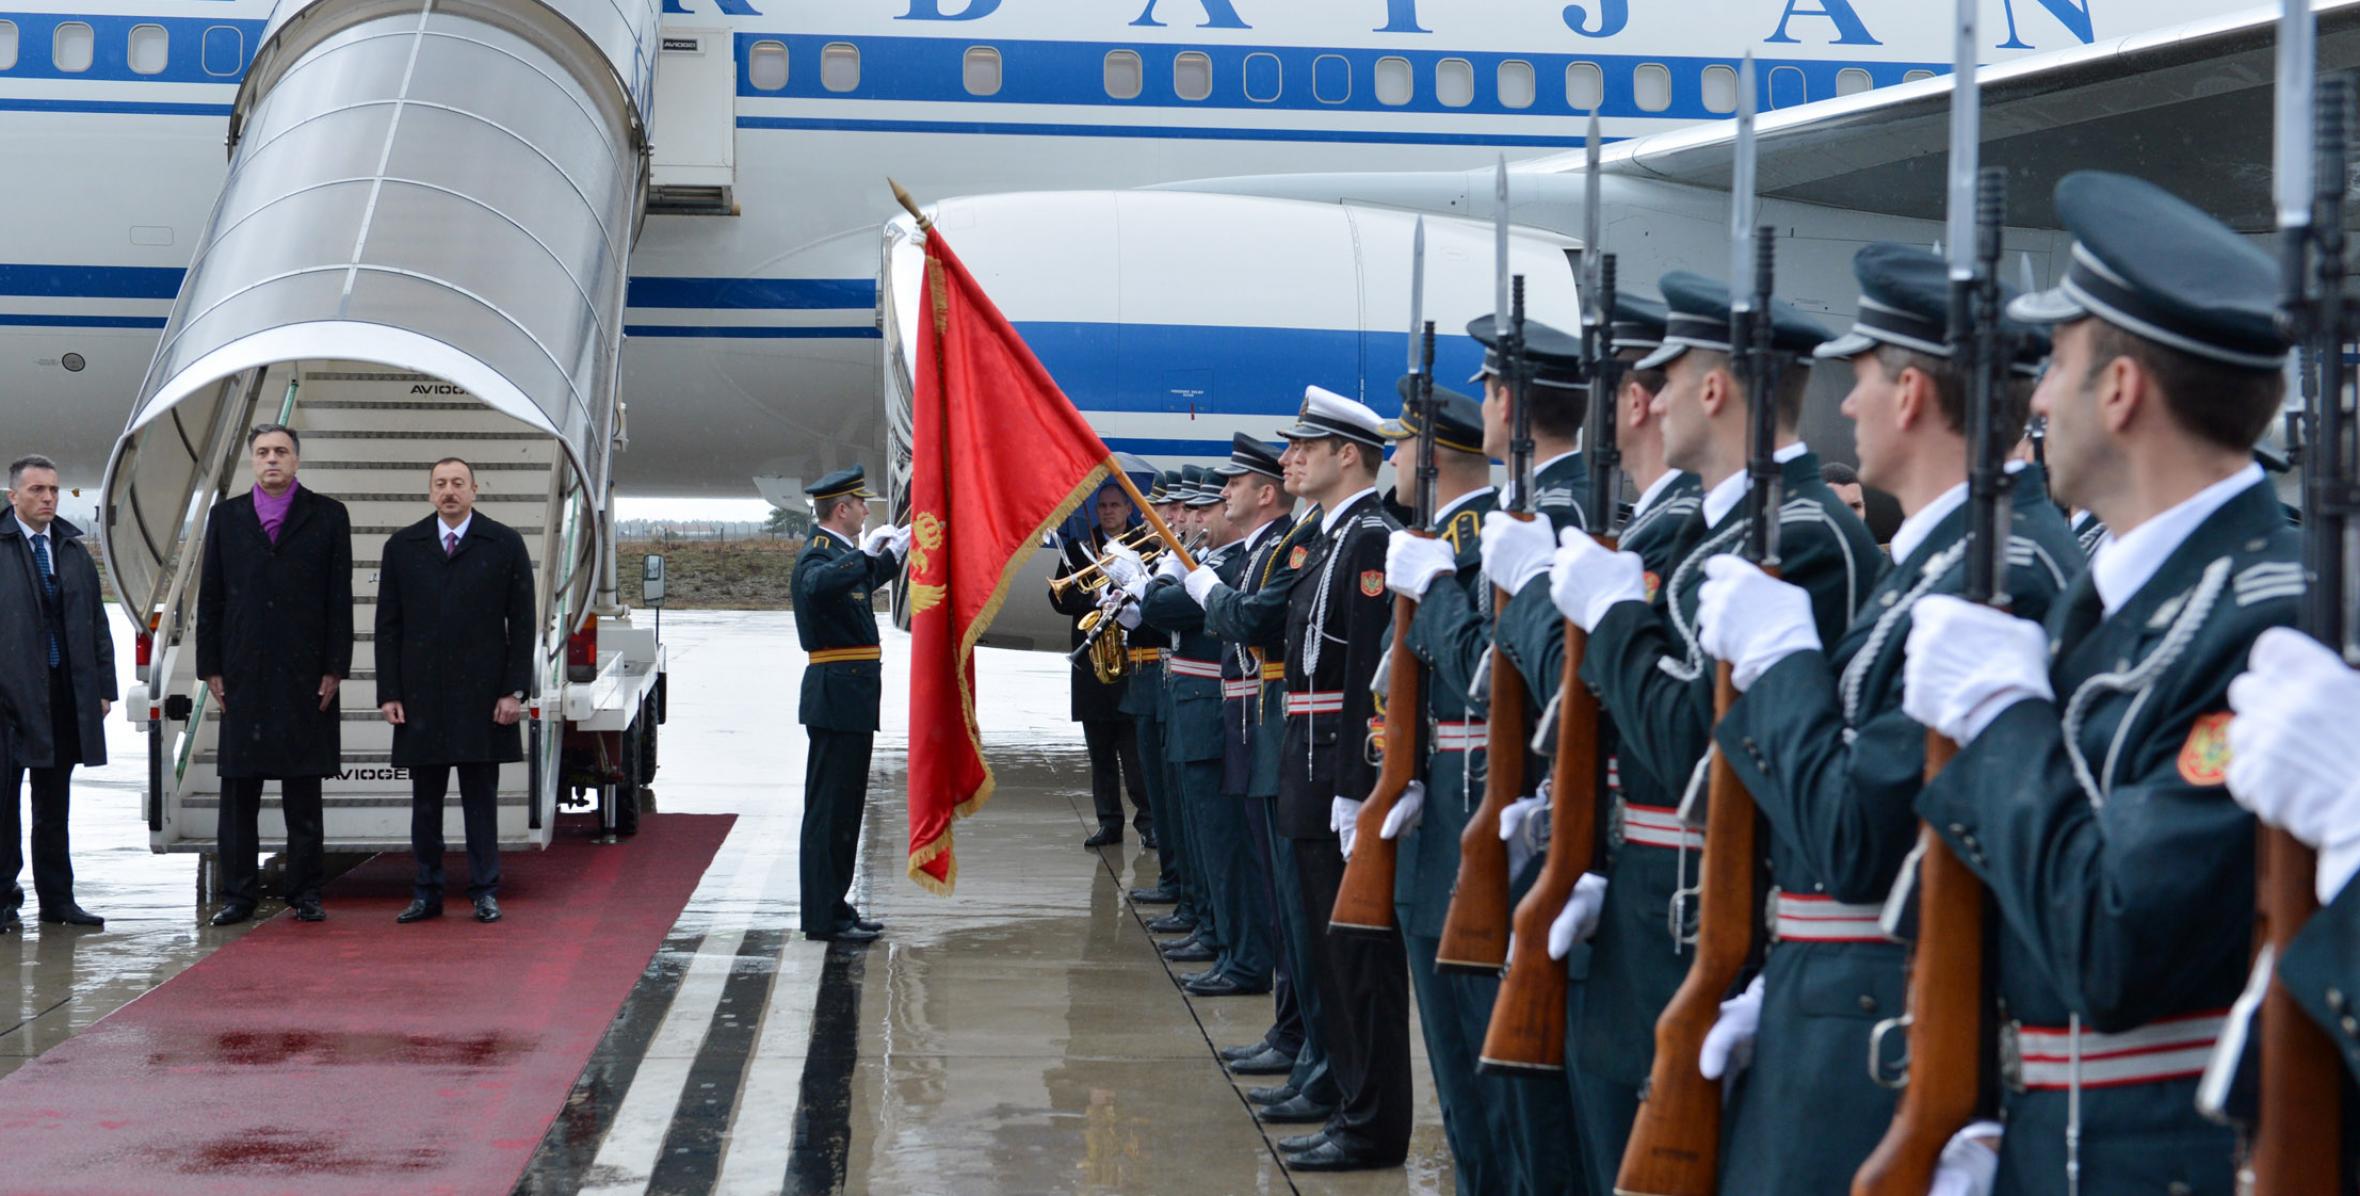 Official welcoming ceremony for President Ilham Aliyev was held in Podgorica